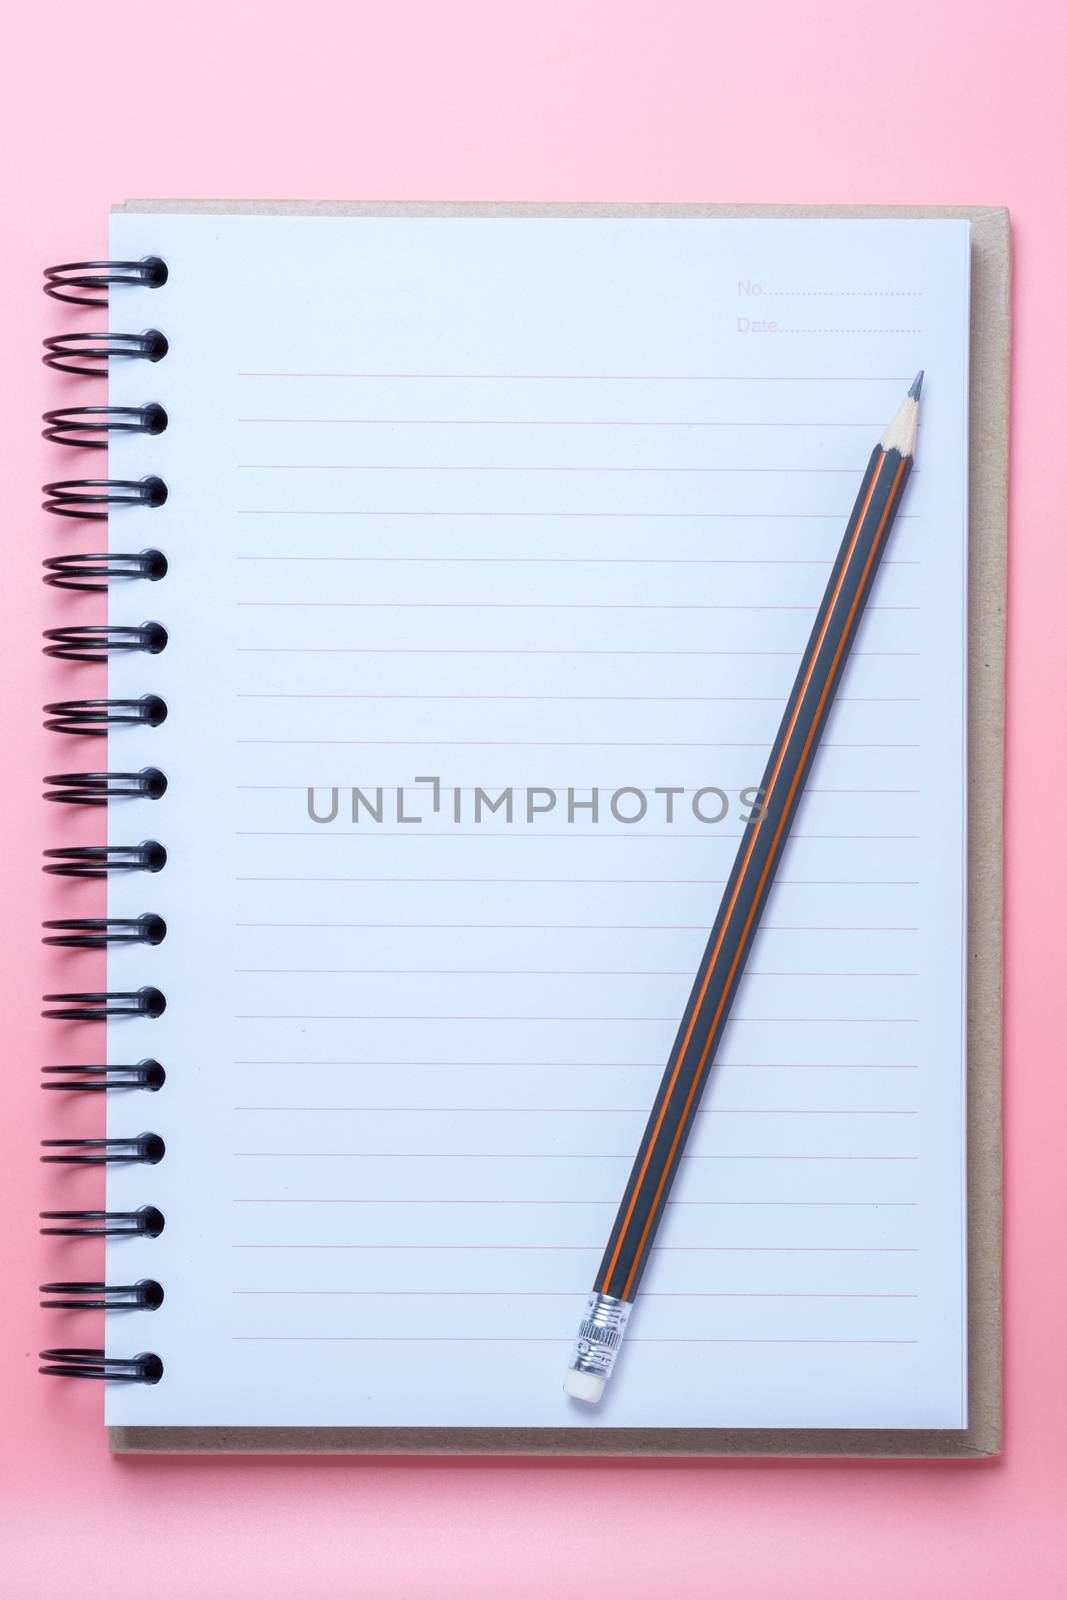 Notebook and pencil on pink background by zneb076